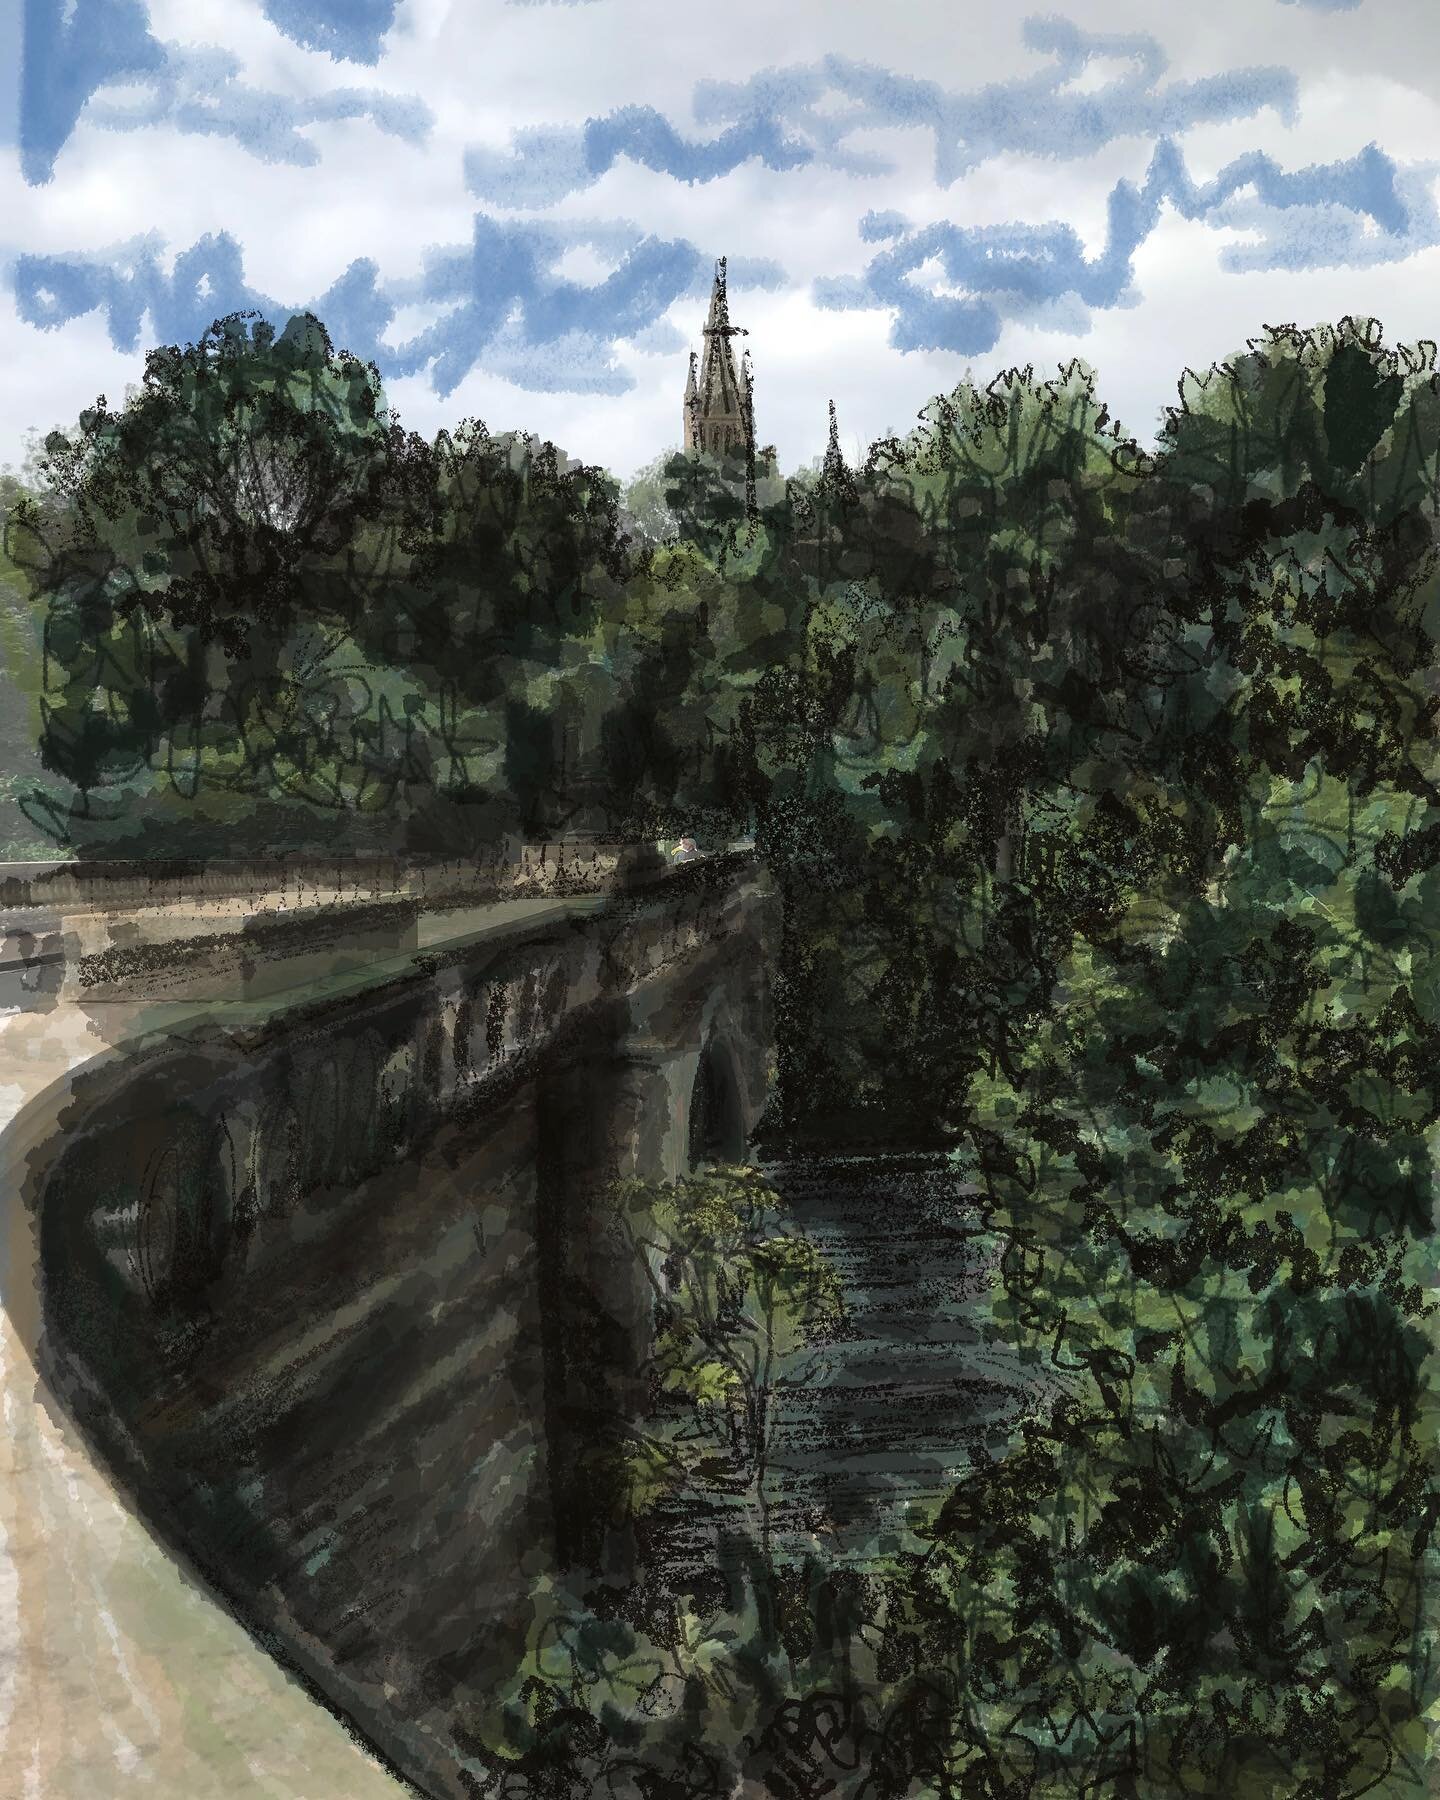 Throwback to Glasgow at the beginning of the month.

#glasgow #drawingglasgow #sketchingglasgow #kelvingroveparkglasgow #ipadsketch #ipadsketchbook